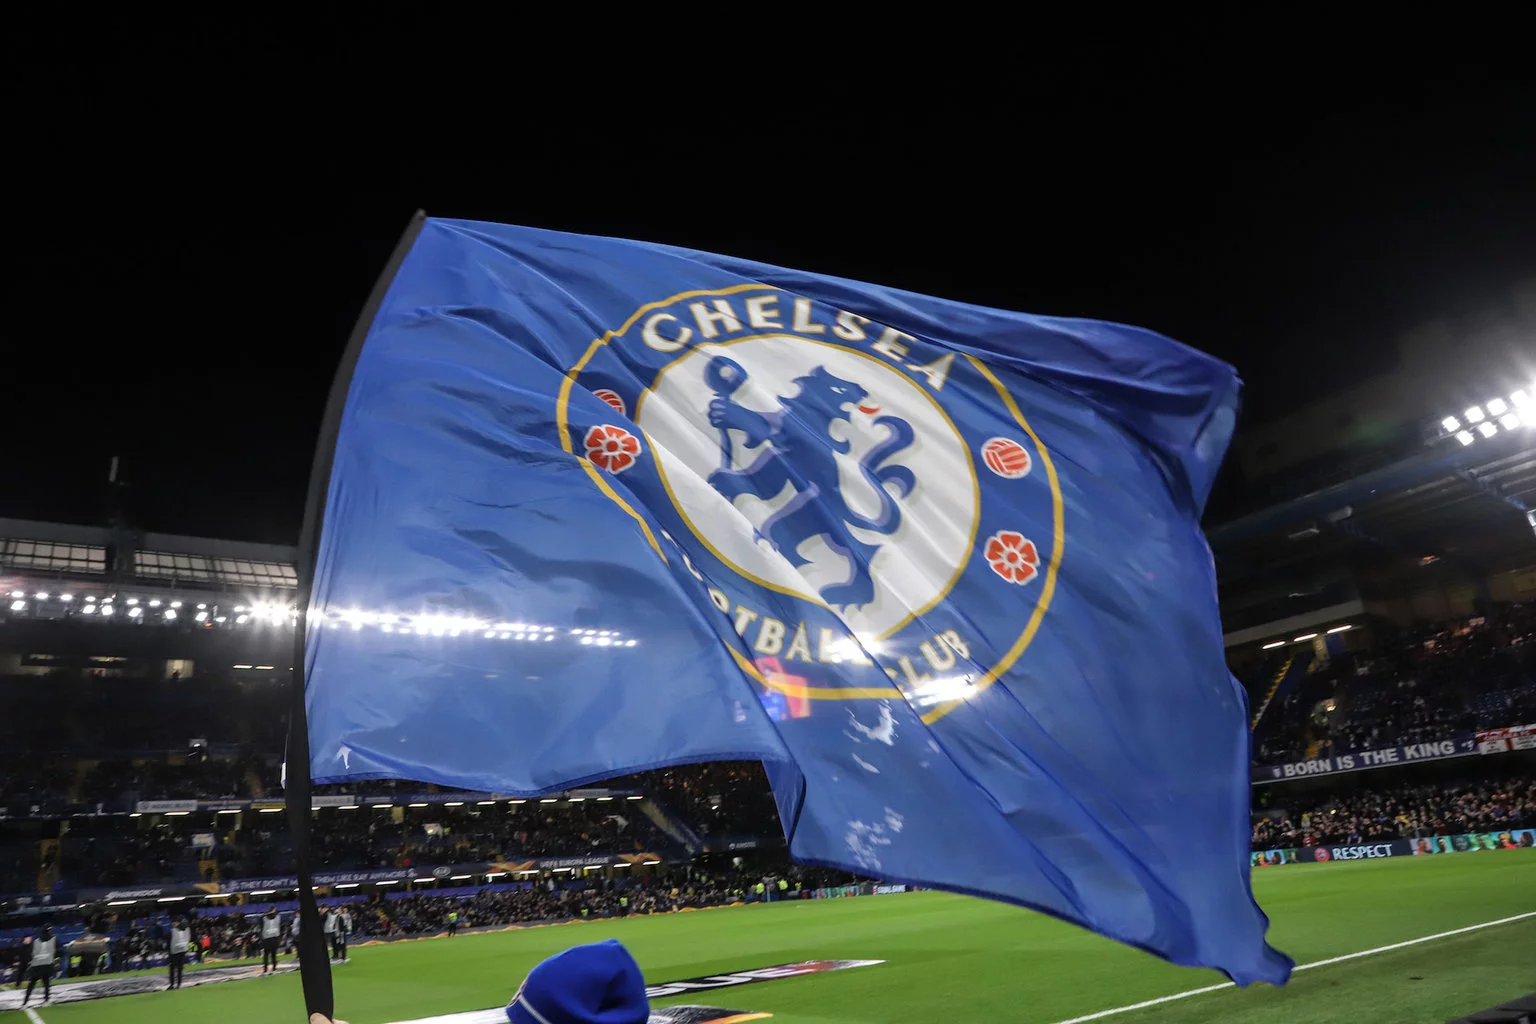  EPL: Chelsea takeover to be approved within 24 hours